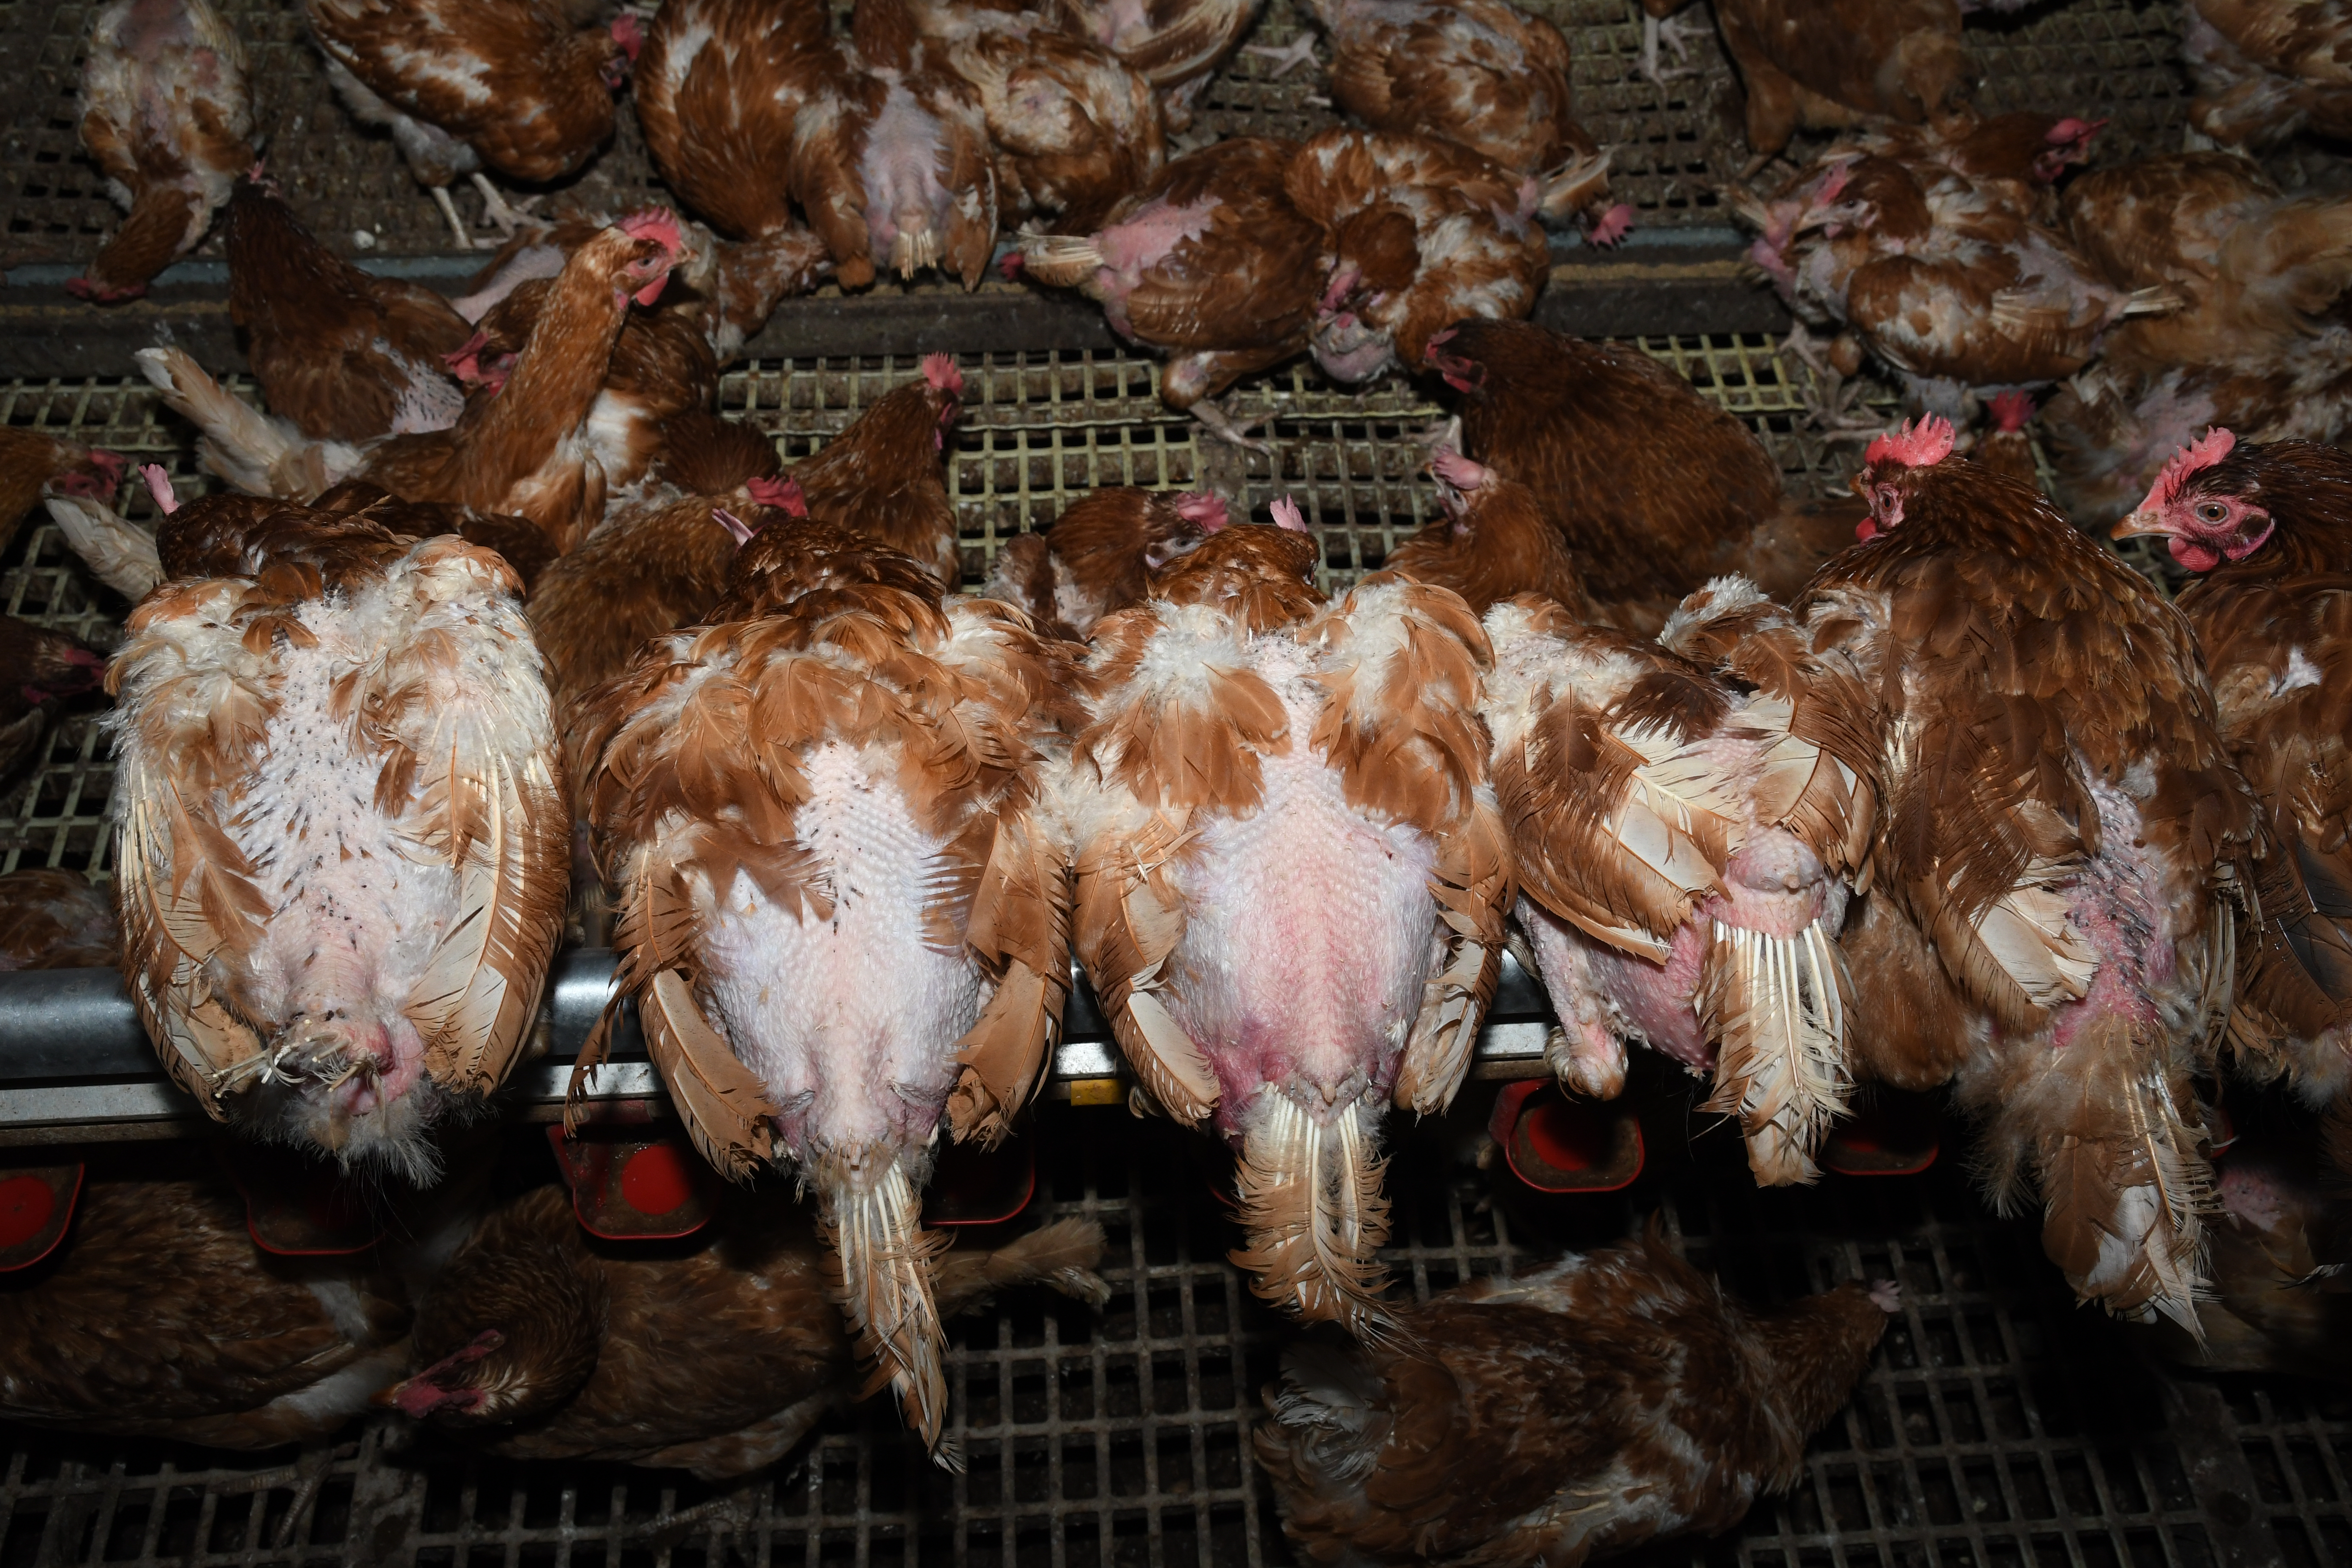 horrible conditions of free range chickens